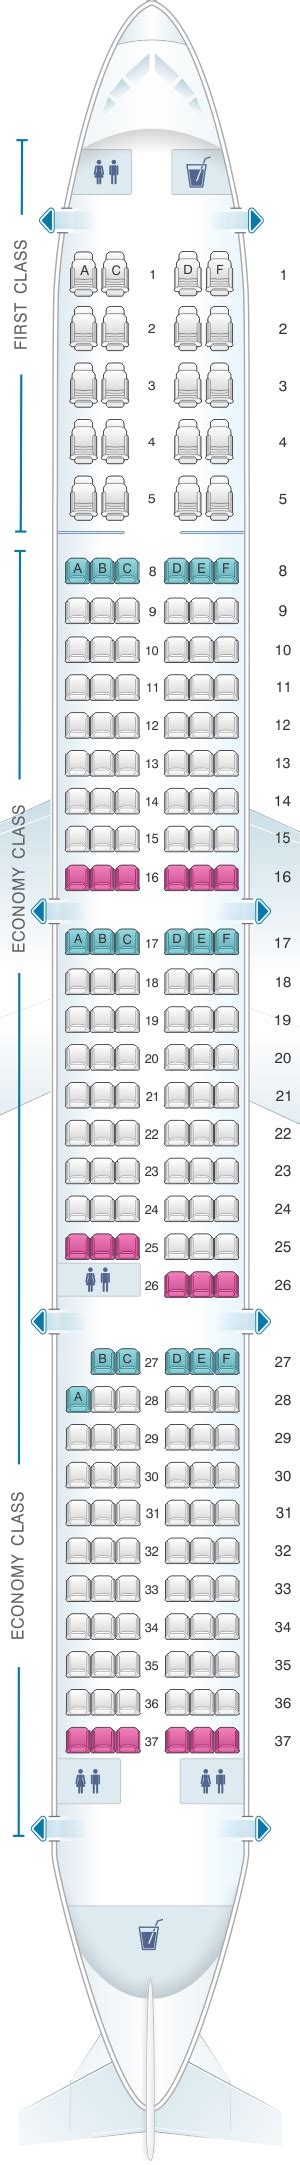 A Seat Map American Airlines